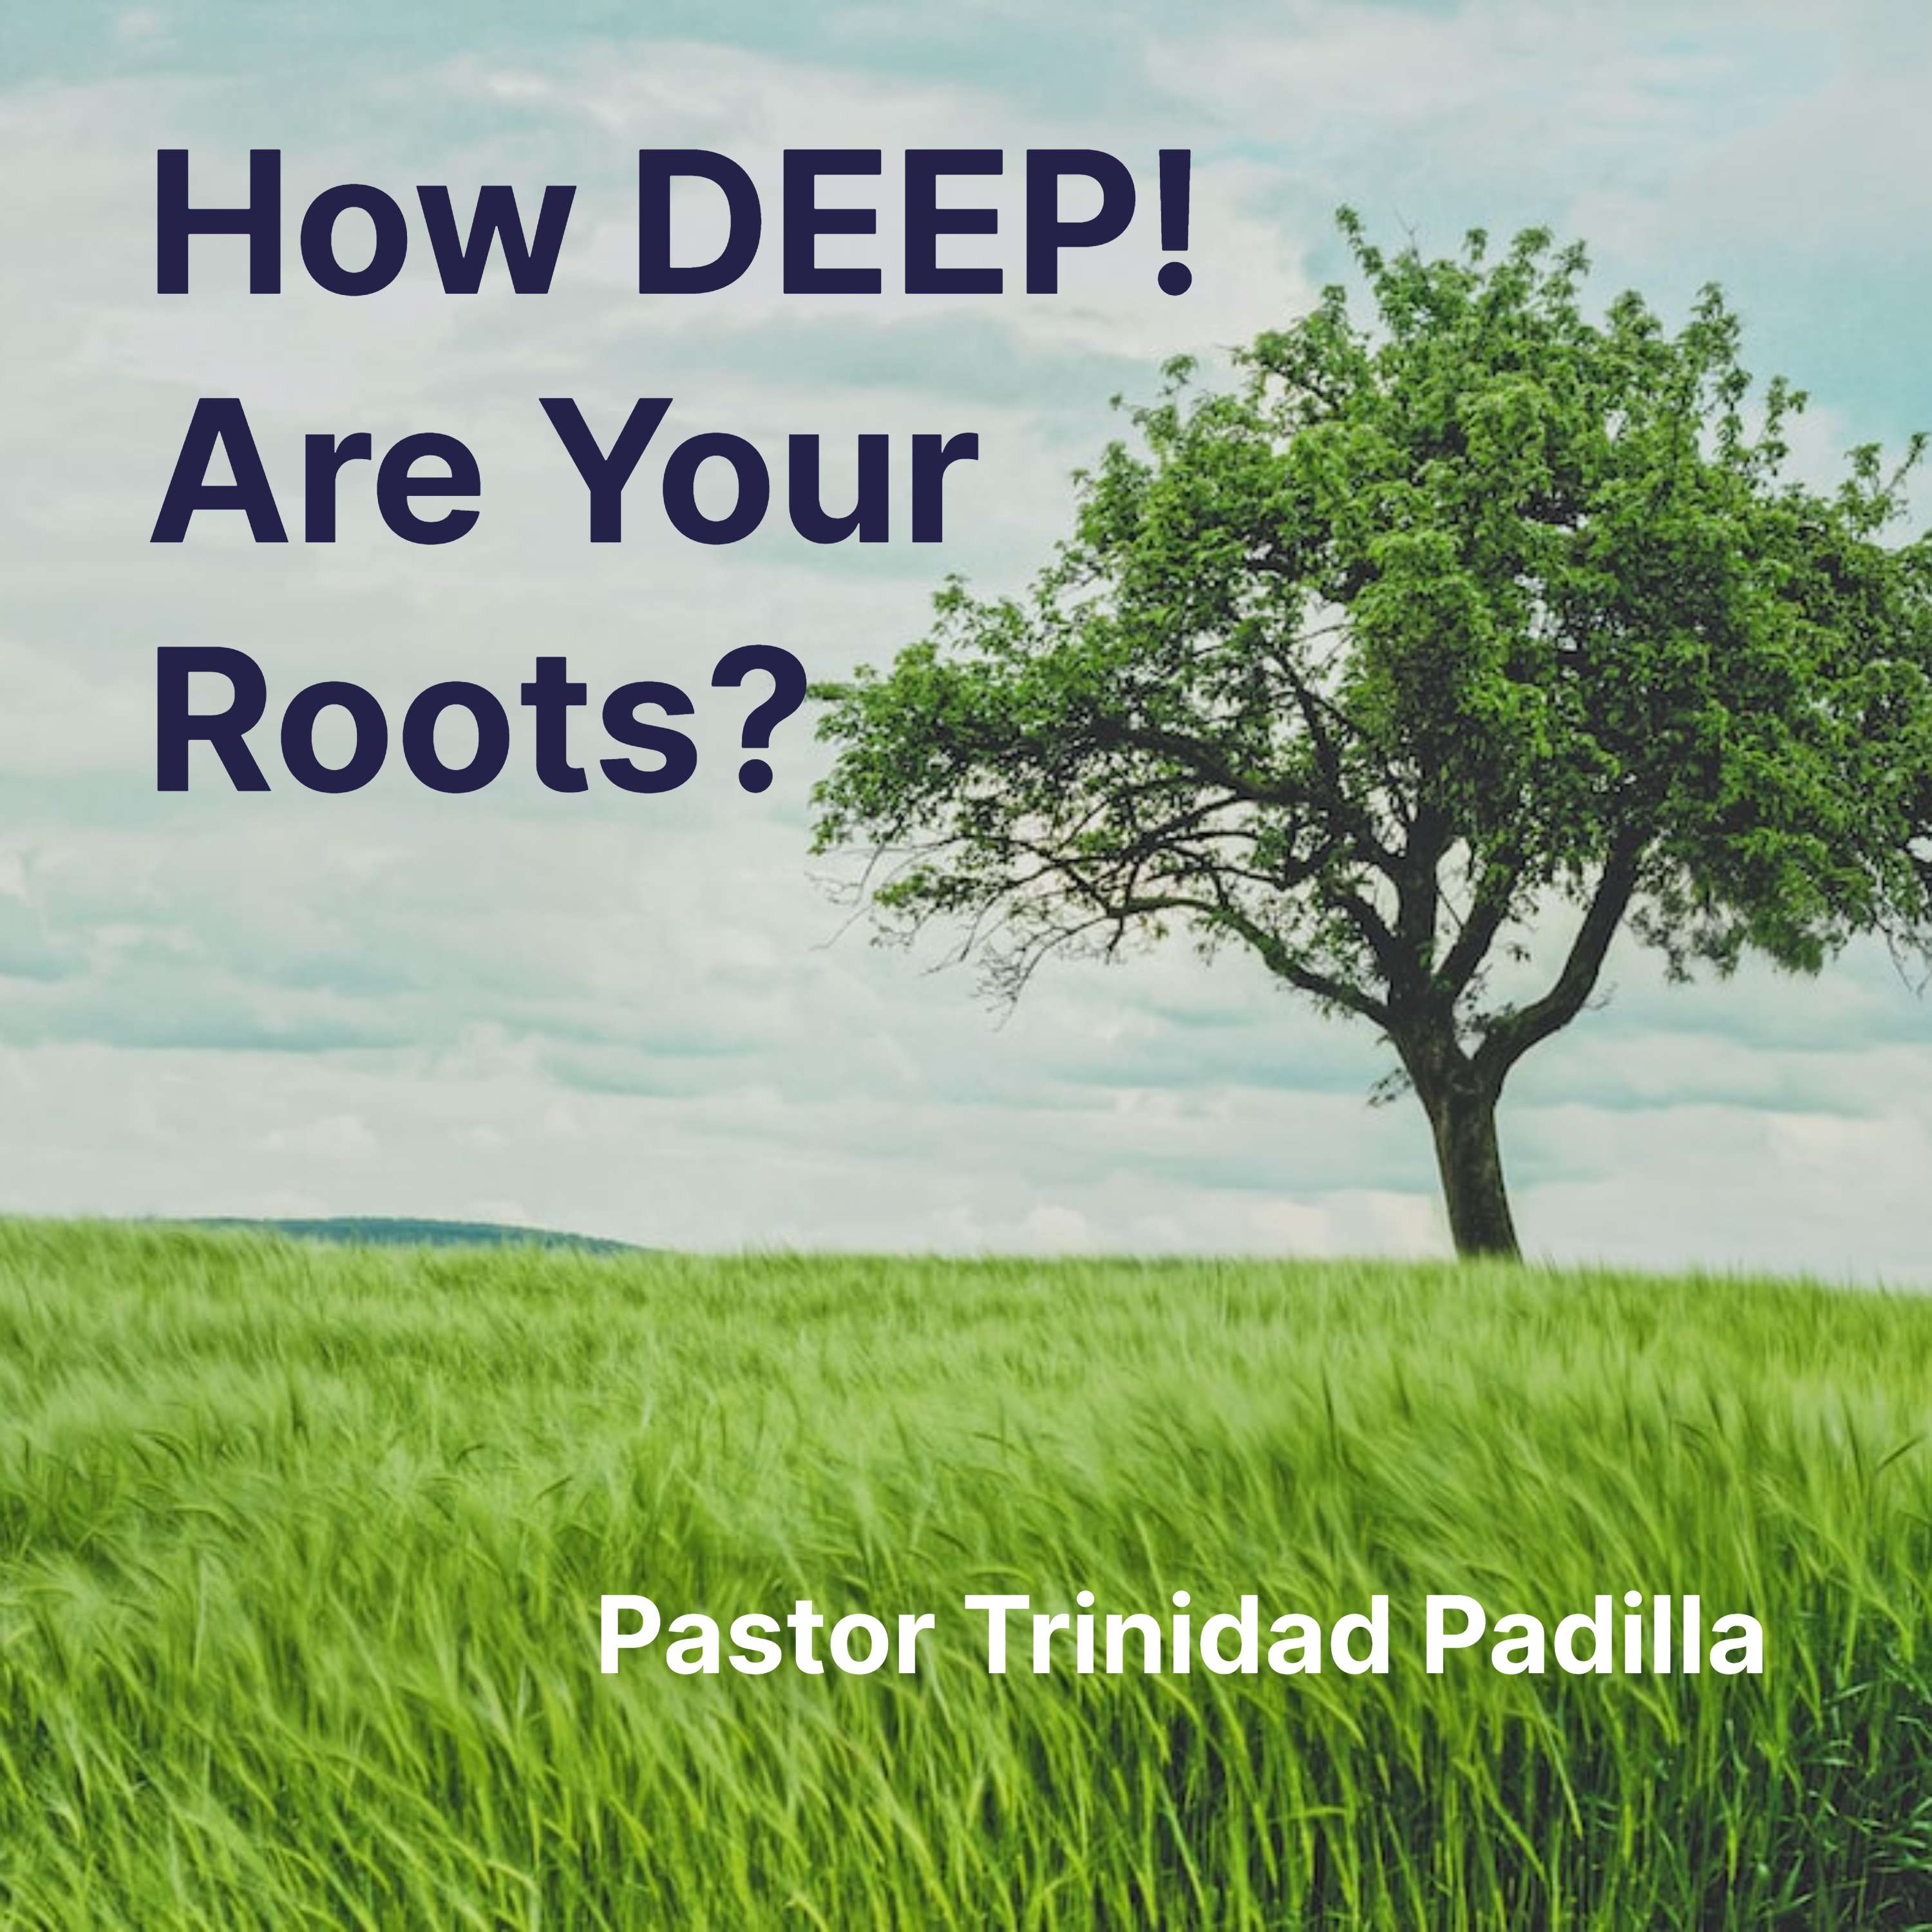 How Deep Are Your Roots? - Trinidad Padilla